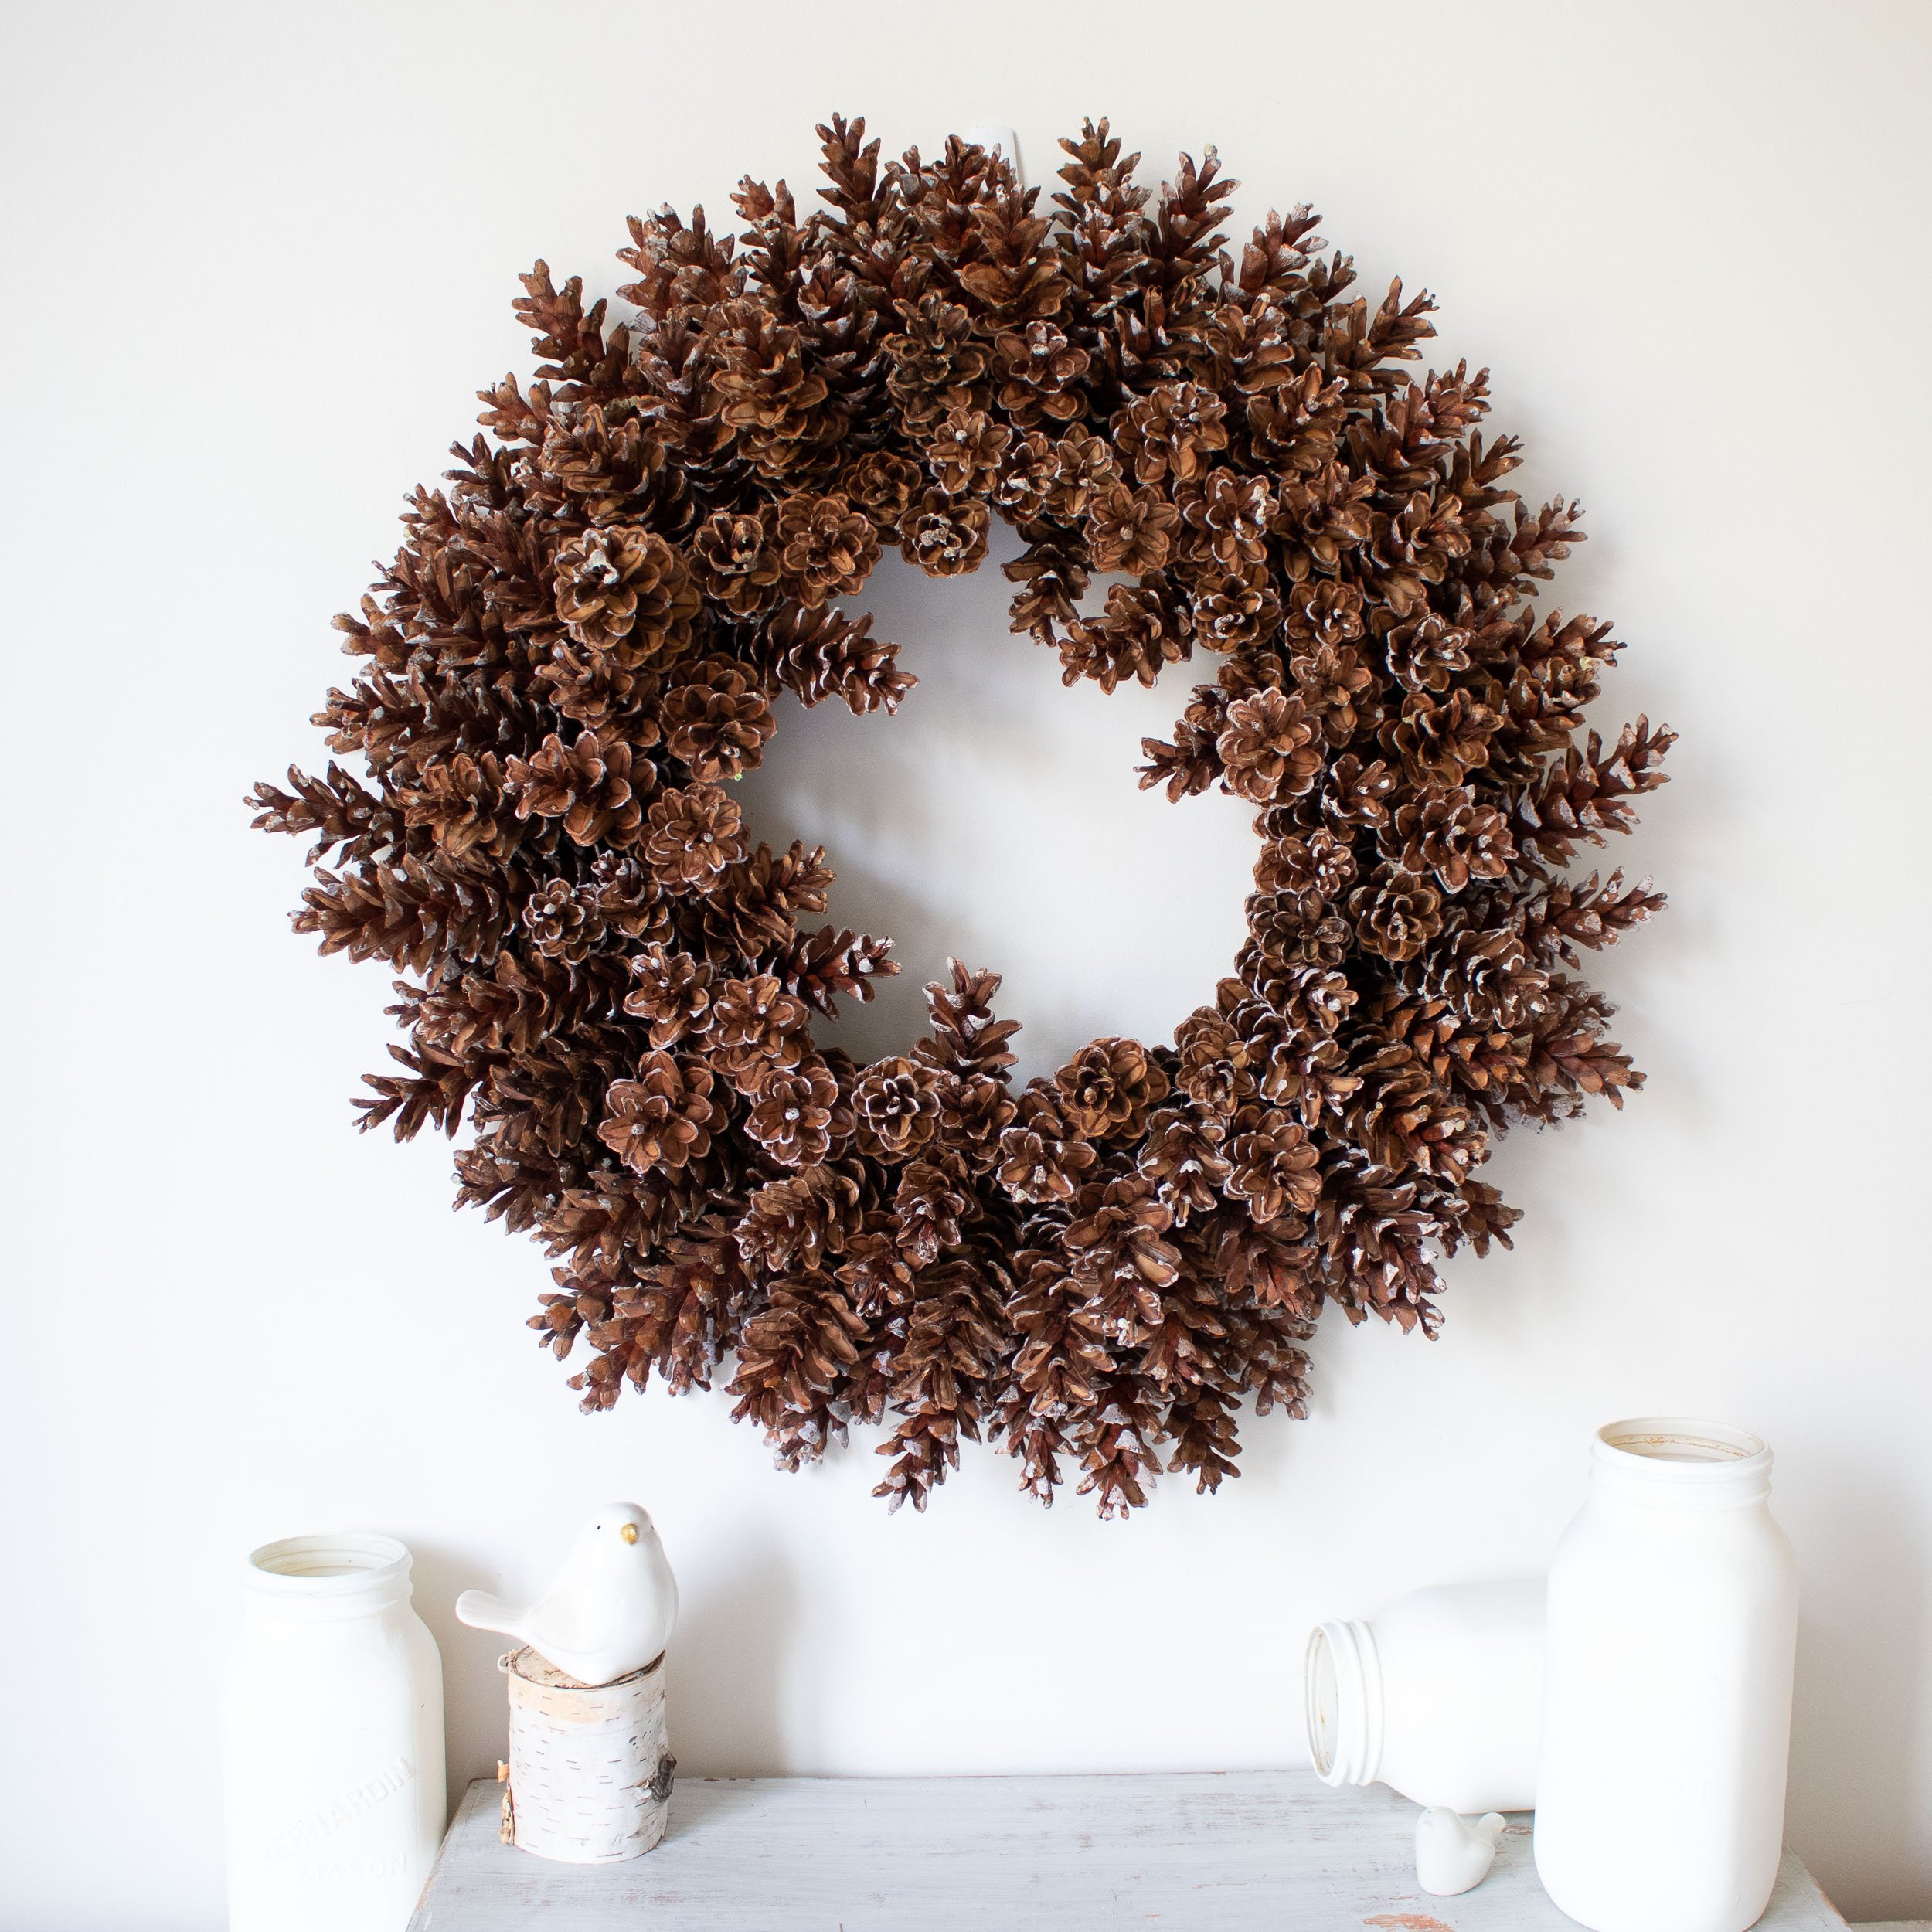 Wire Wreath Frame - Party Time, Inc.